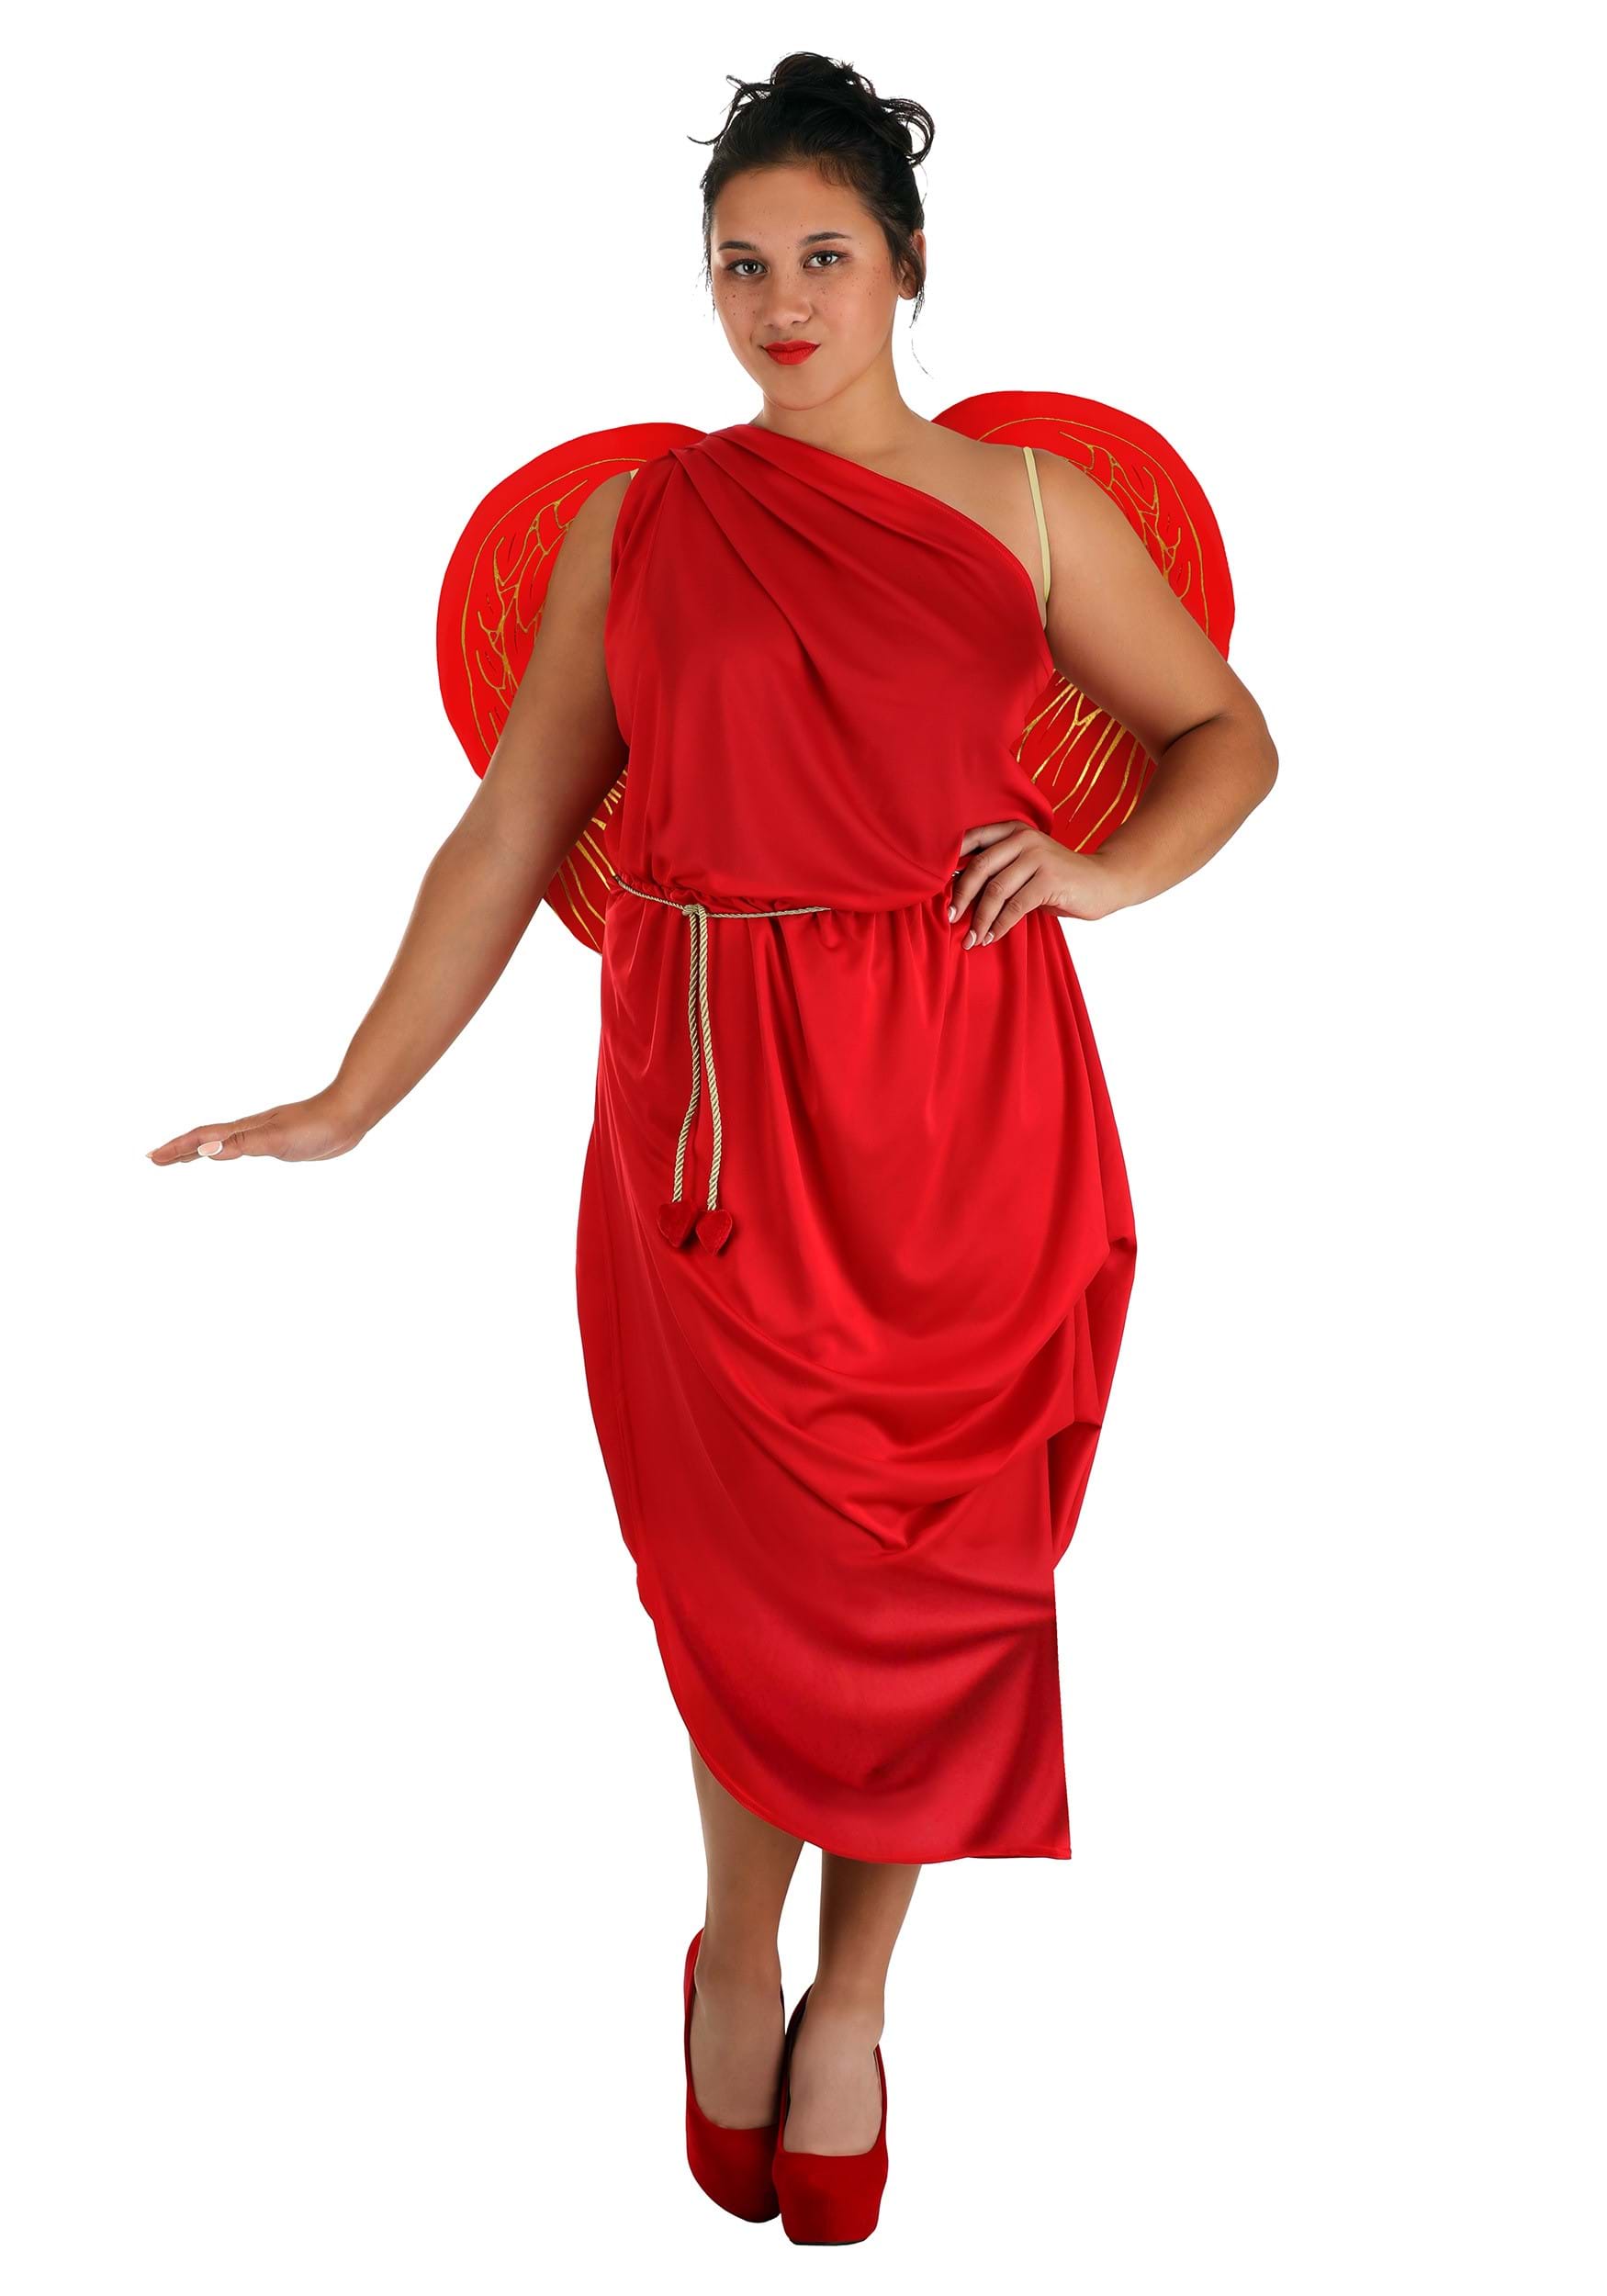 Photos - Fancy Dress FUN Costumes Plus Size Cupid Costume Dress for Women Brown/Red FUN3085